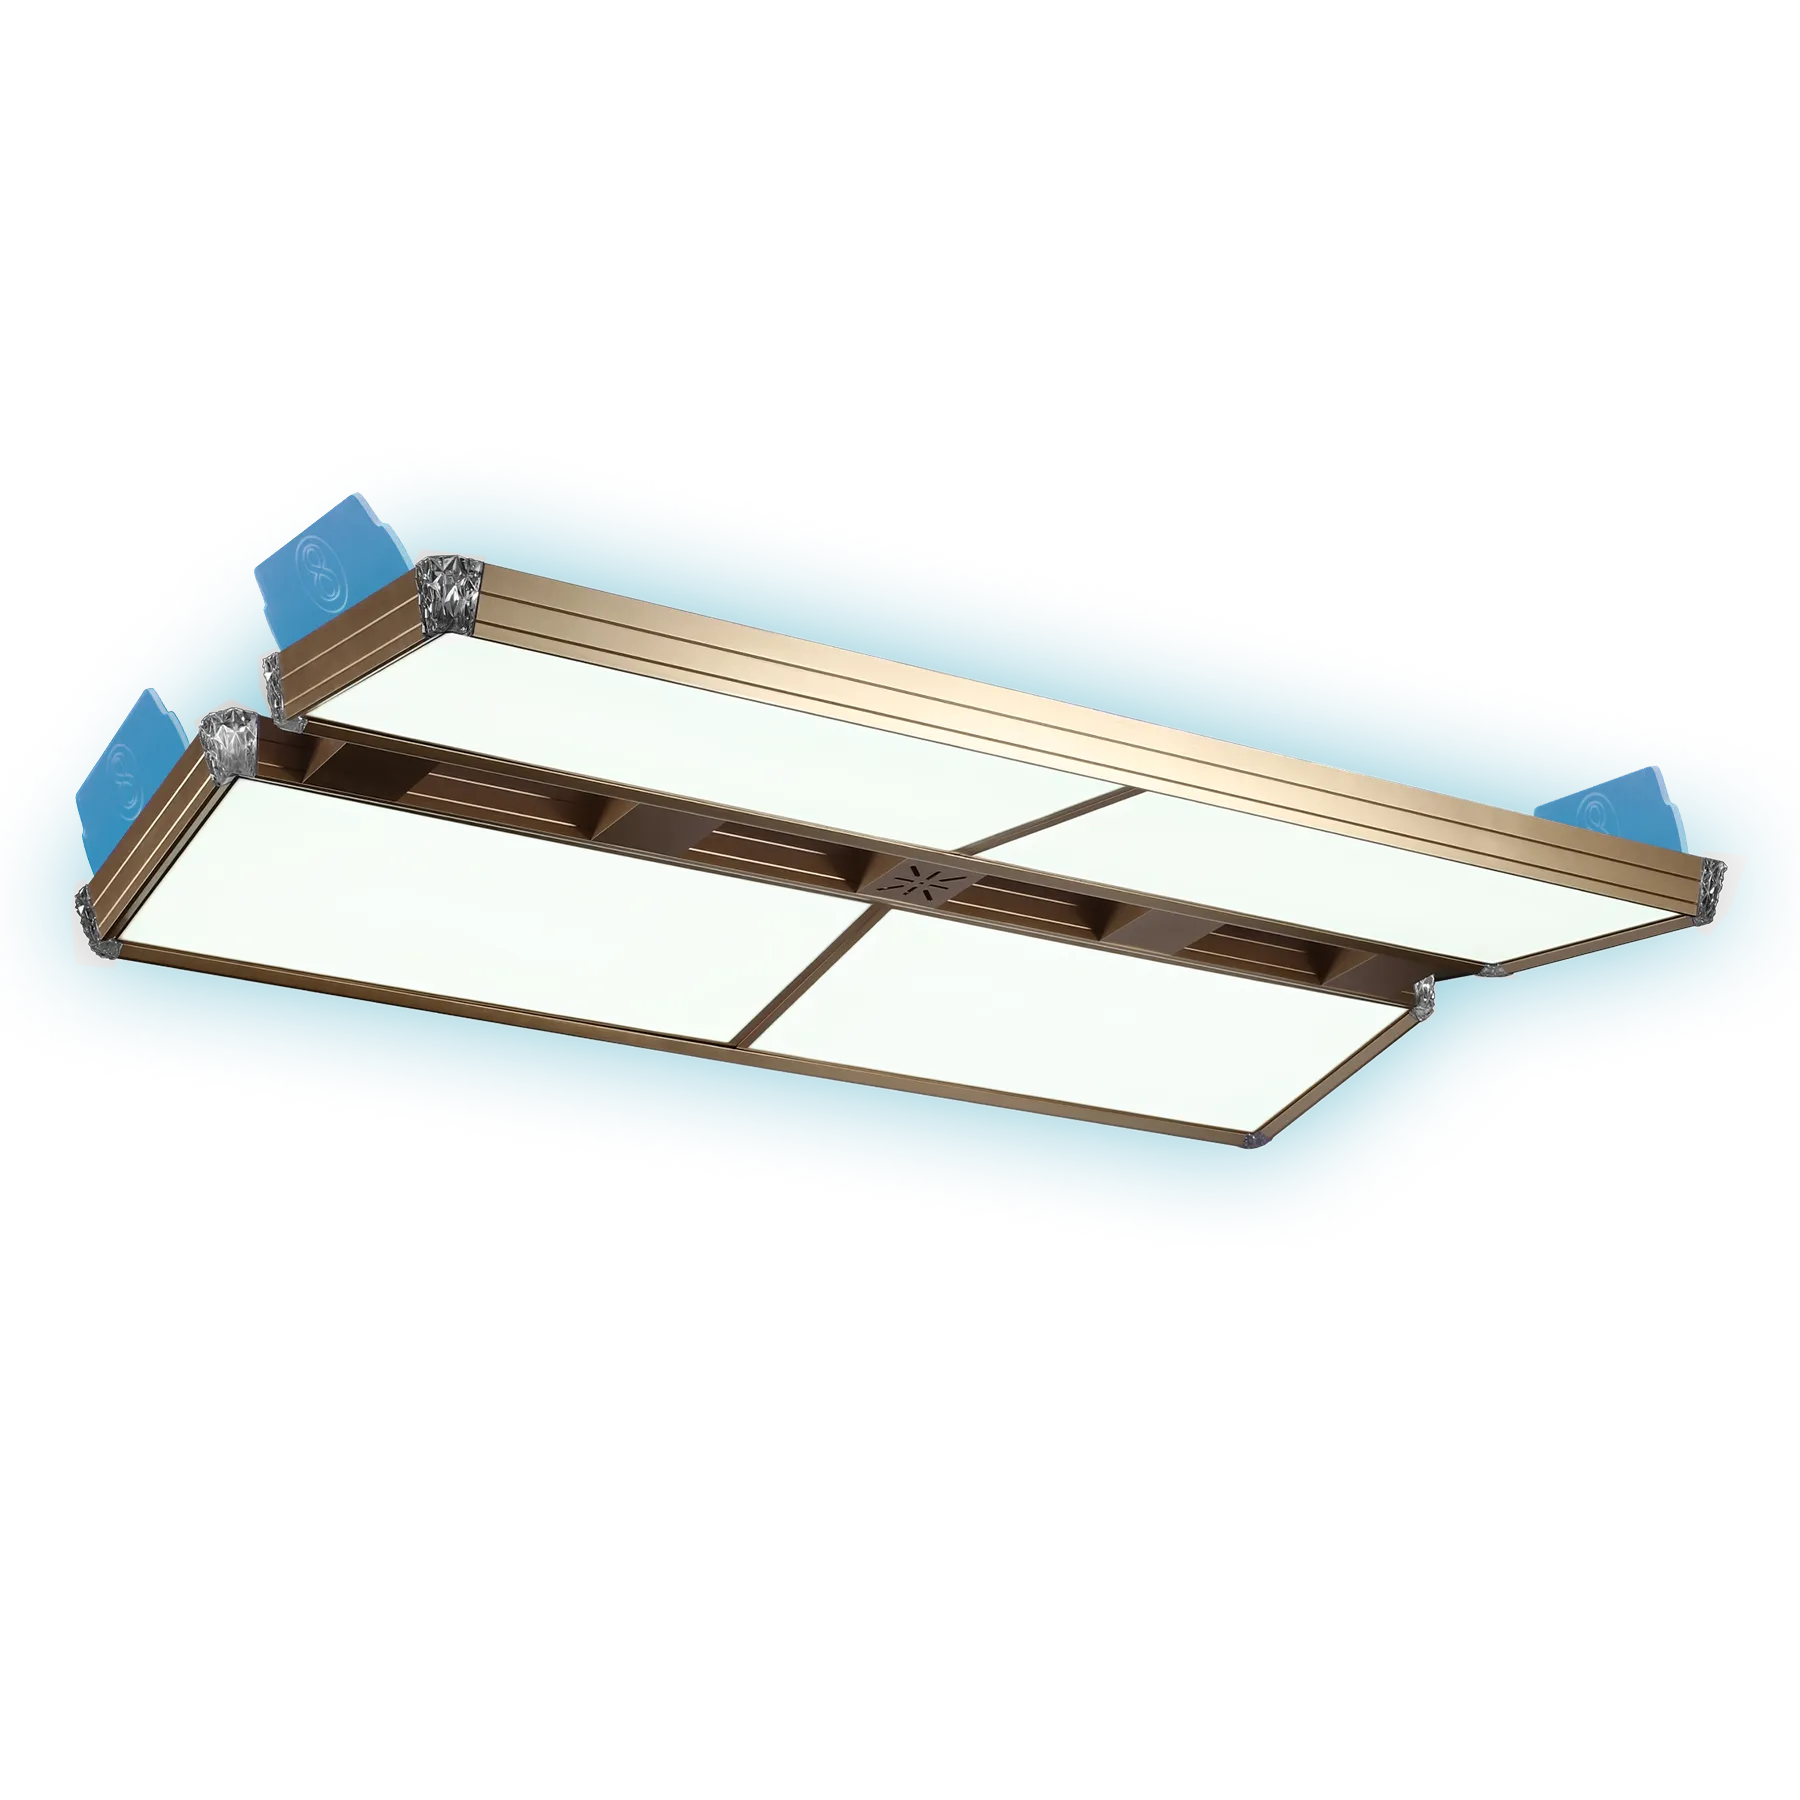 LED BILLIARD LIGHT - A Series A1 - For 7 FT Pool Table